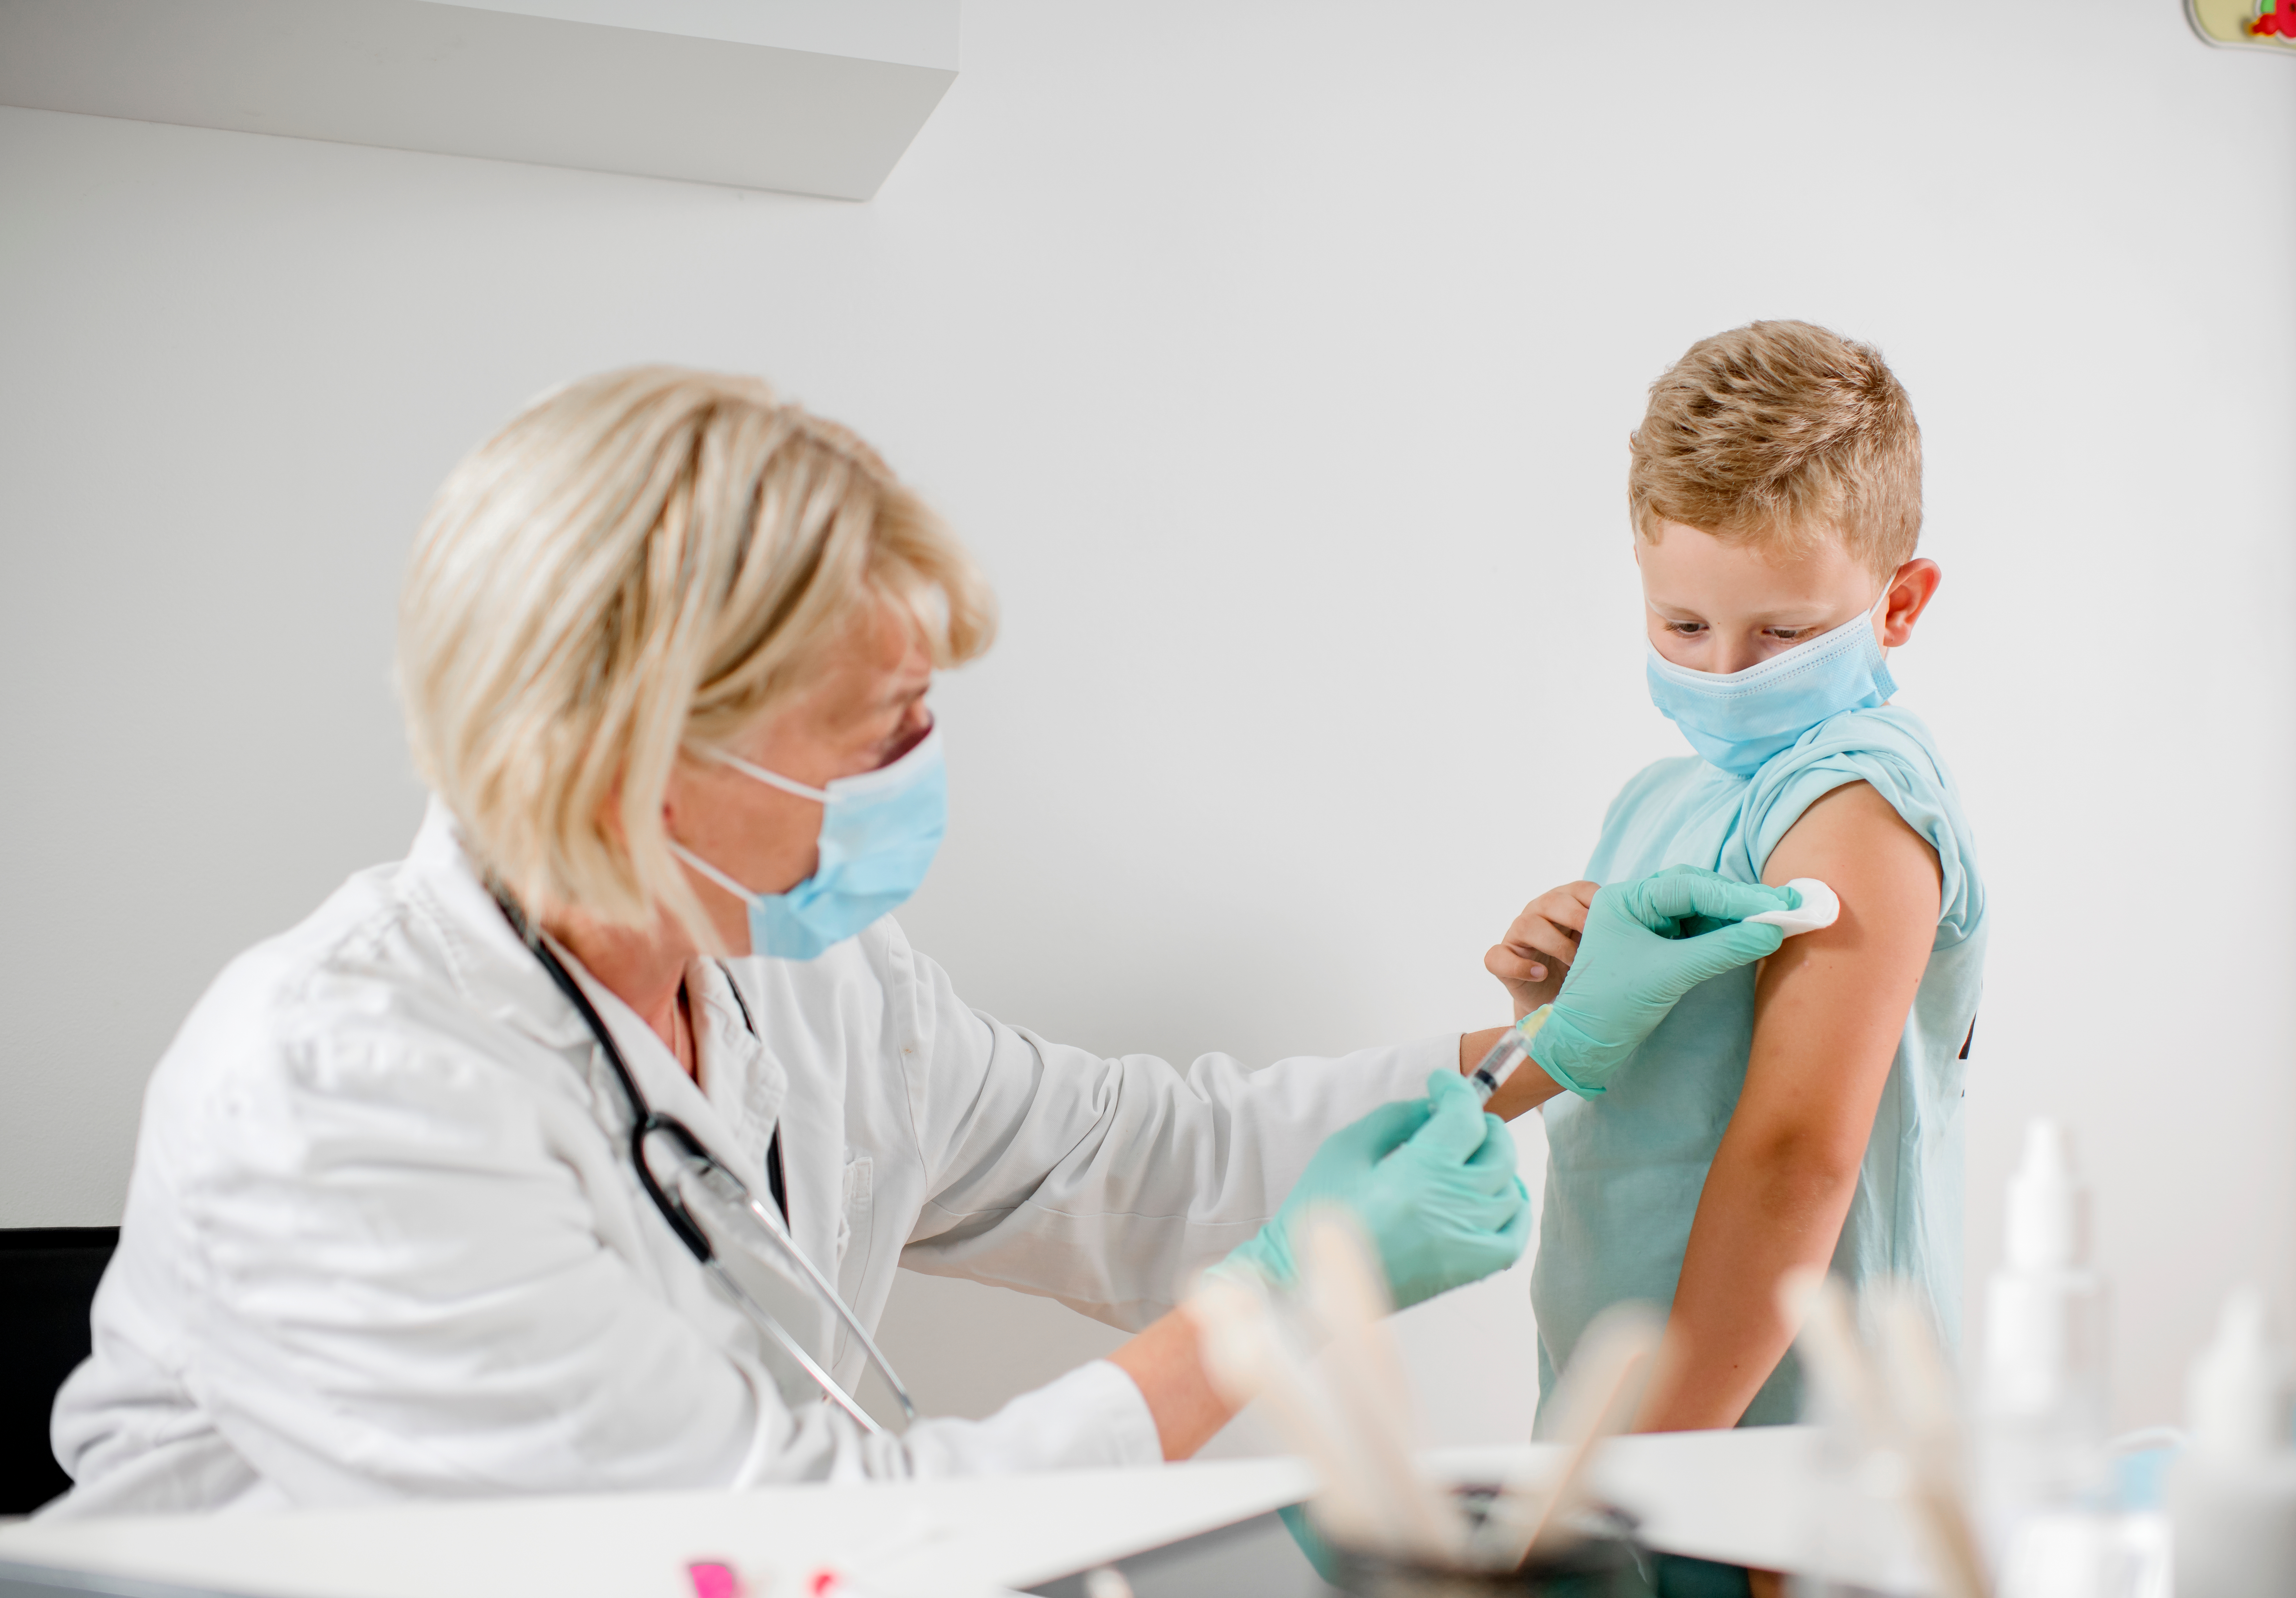 Millions of Children Have Received the COVID-19 Vaccine. But Are Kids Really at Risk from COVID?